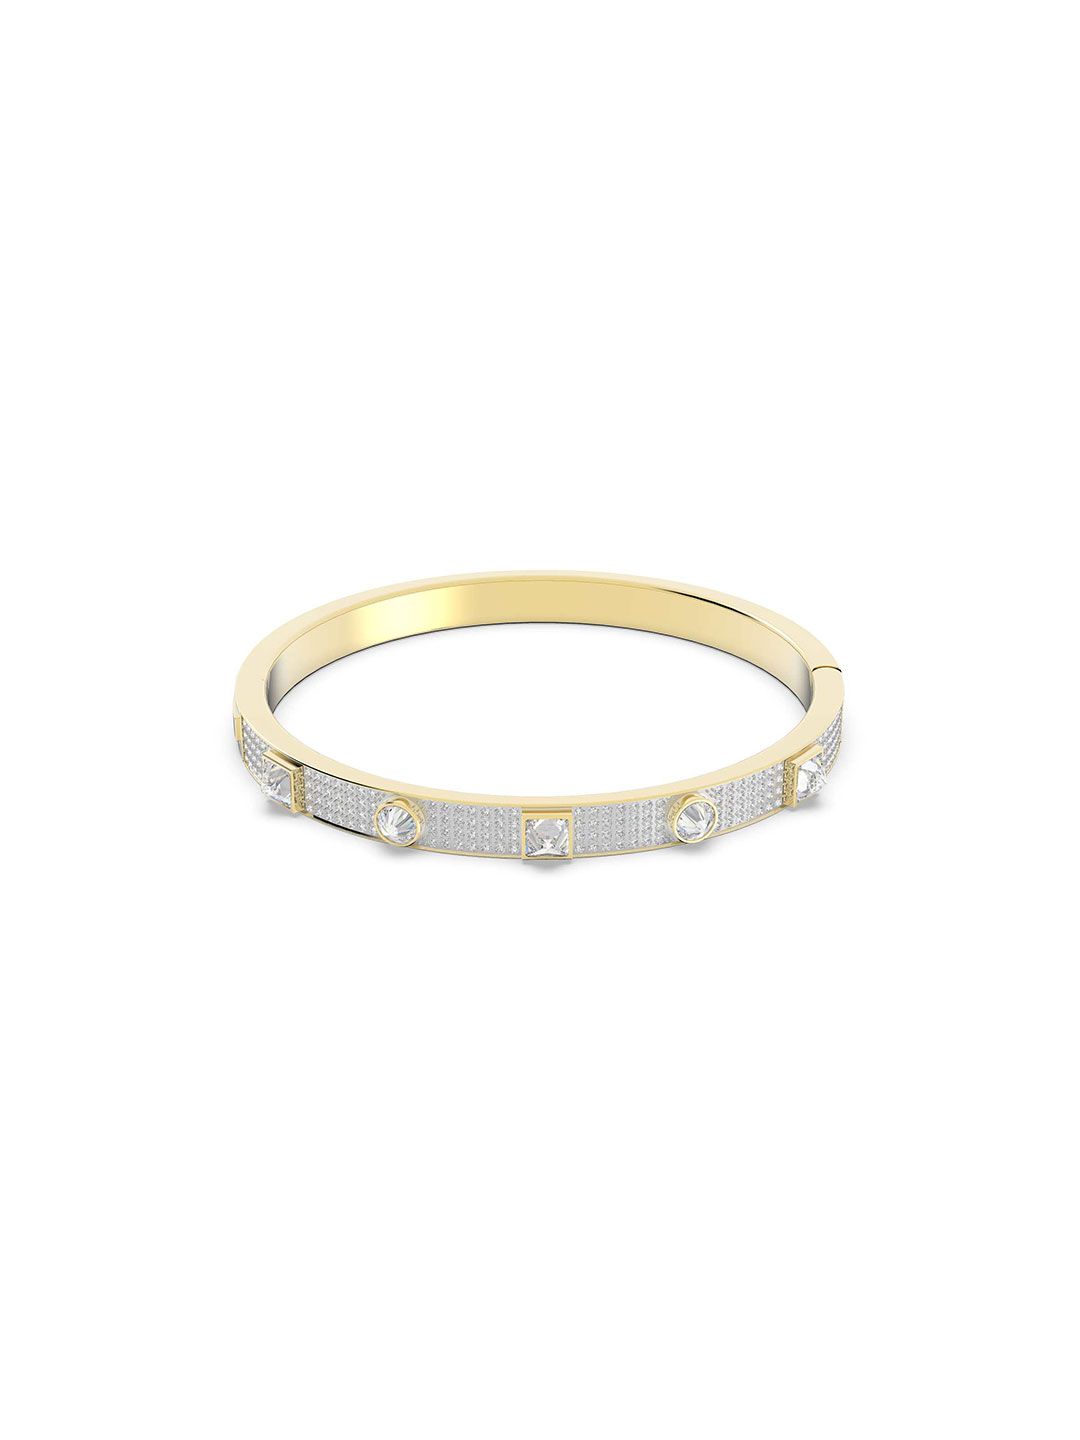 SWAROVSKI Women Gold-Toned & White Crystals Gold-Plated Bangle-Style Bracelet Price in India